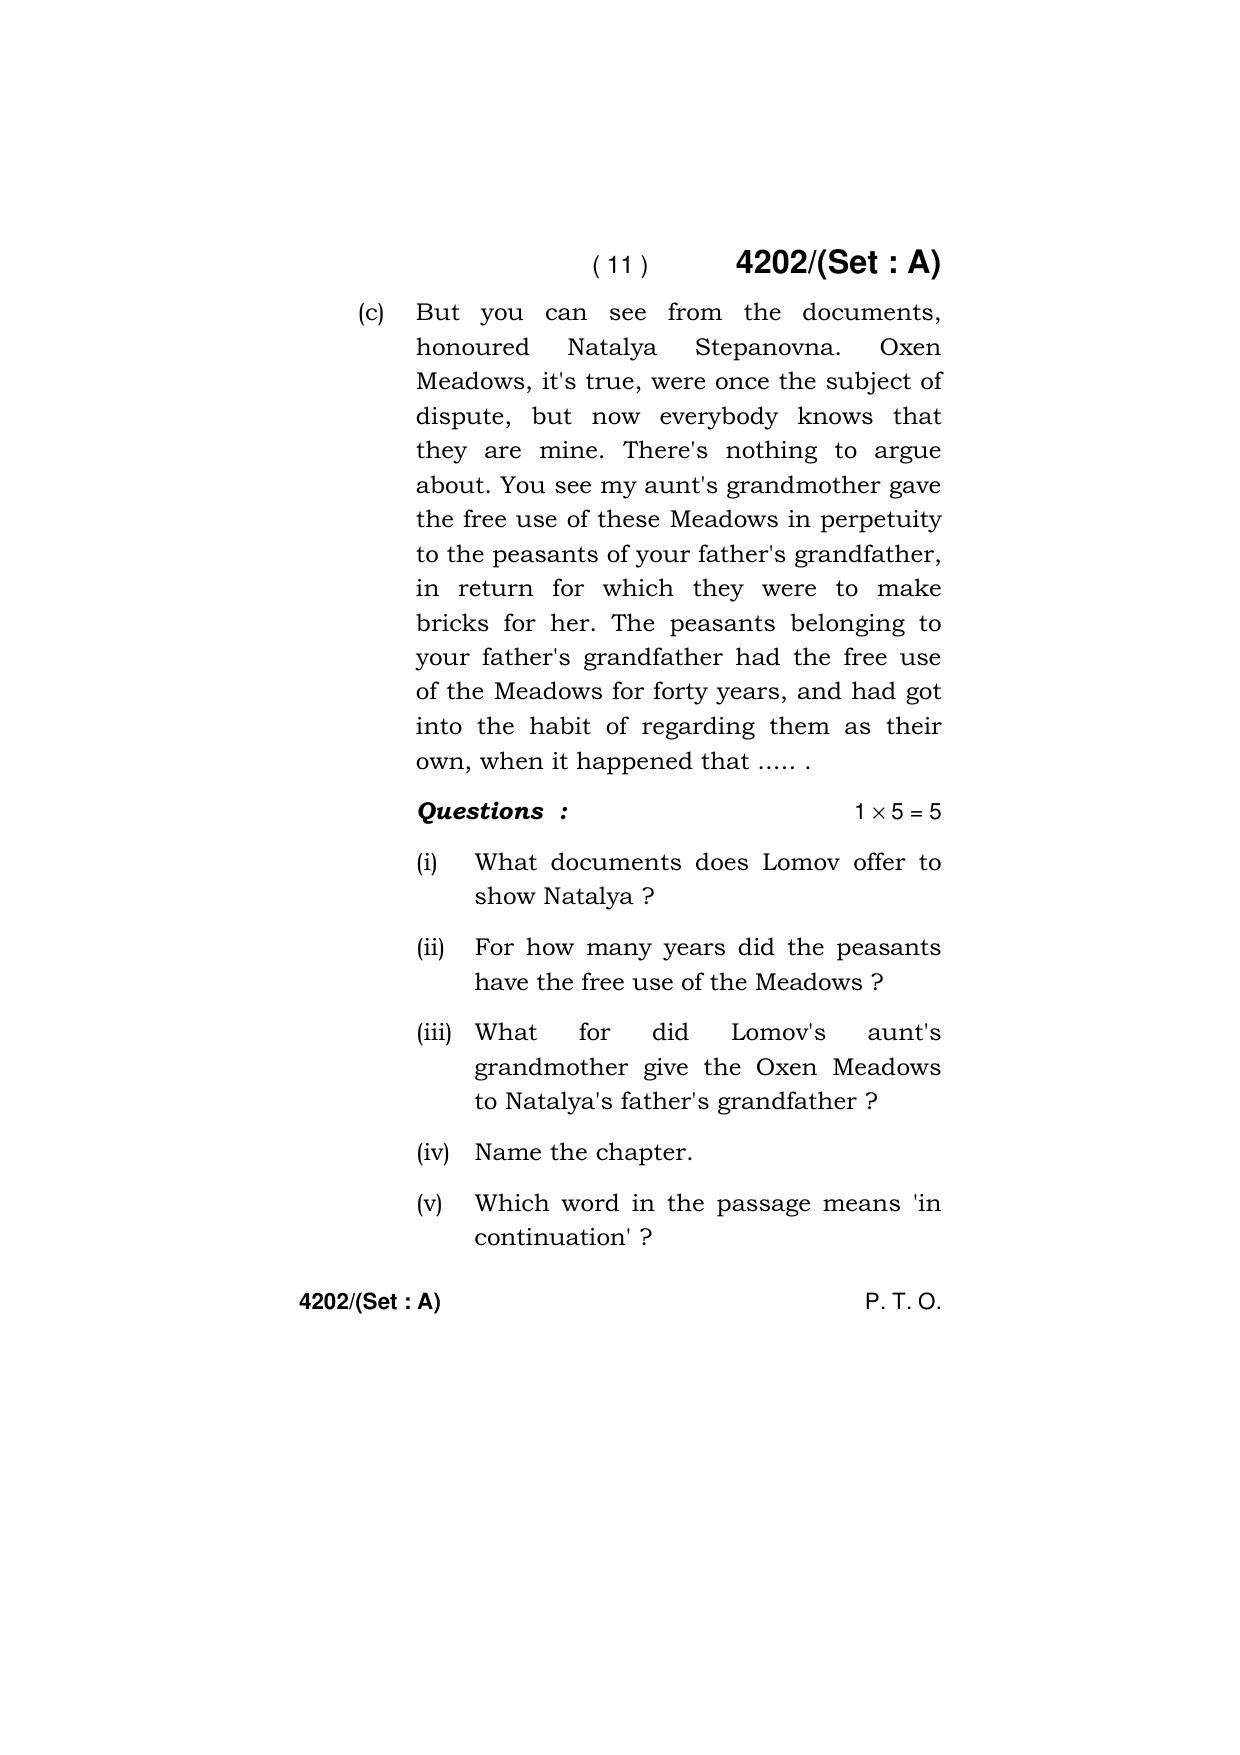 Haryana Board HBSE Class 10 English (All Set) 2019 Question Paper - Page 11